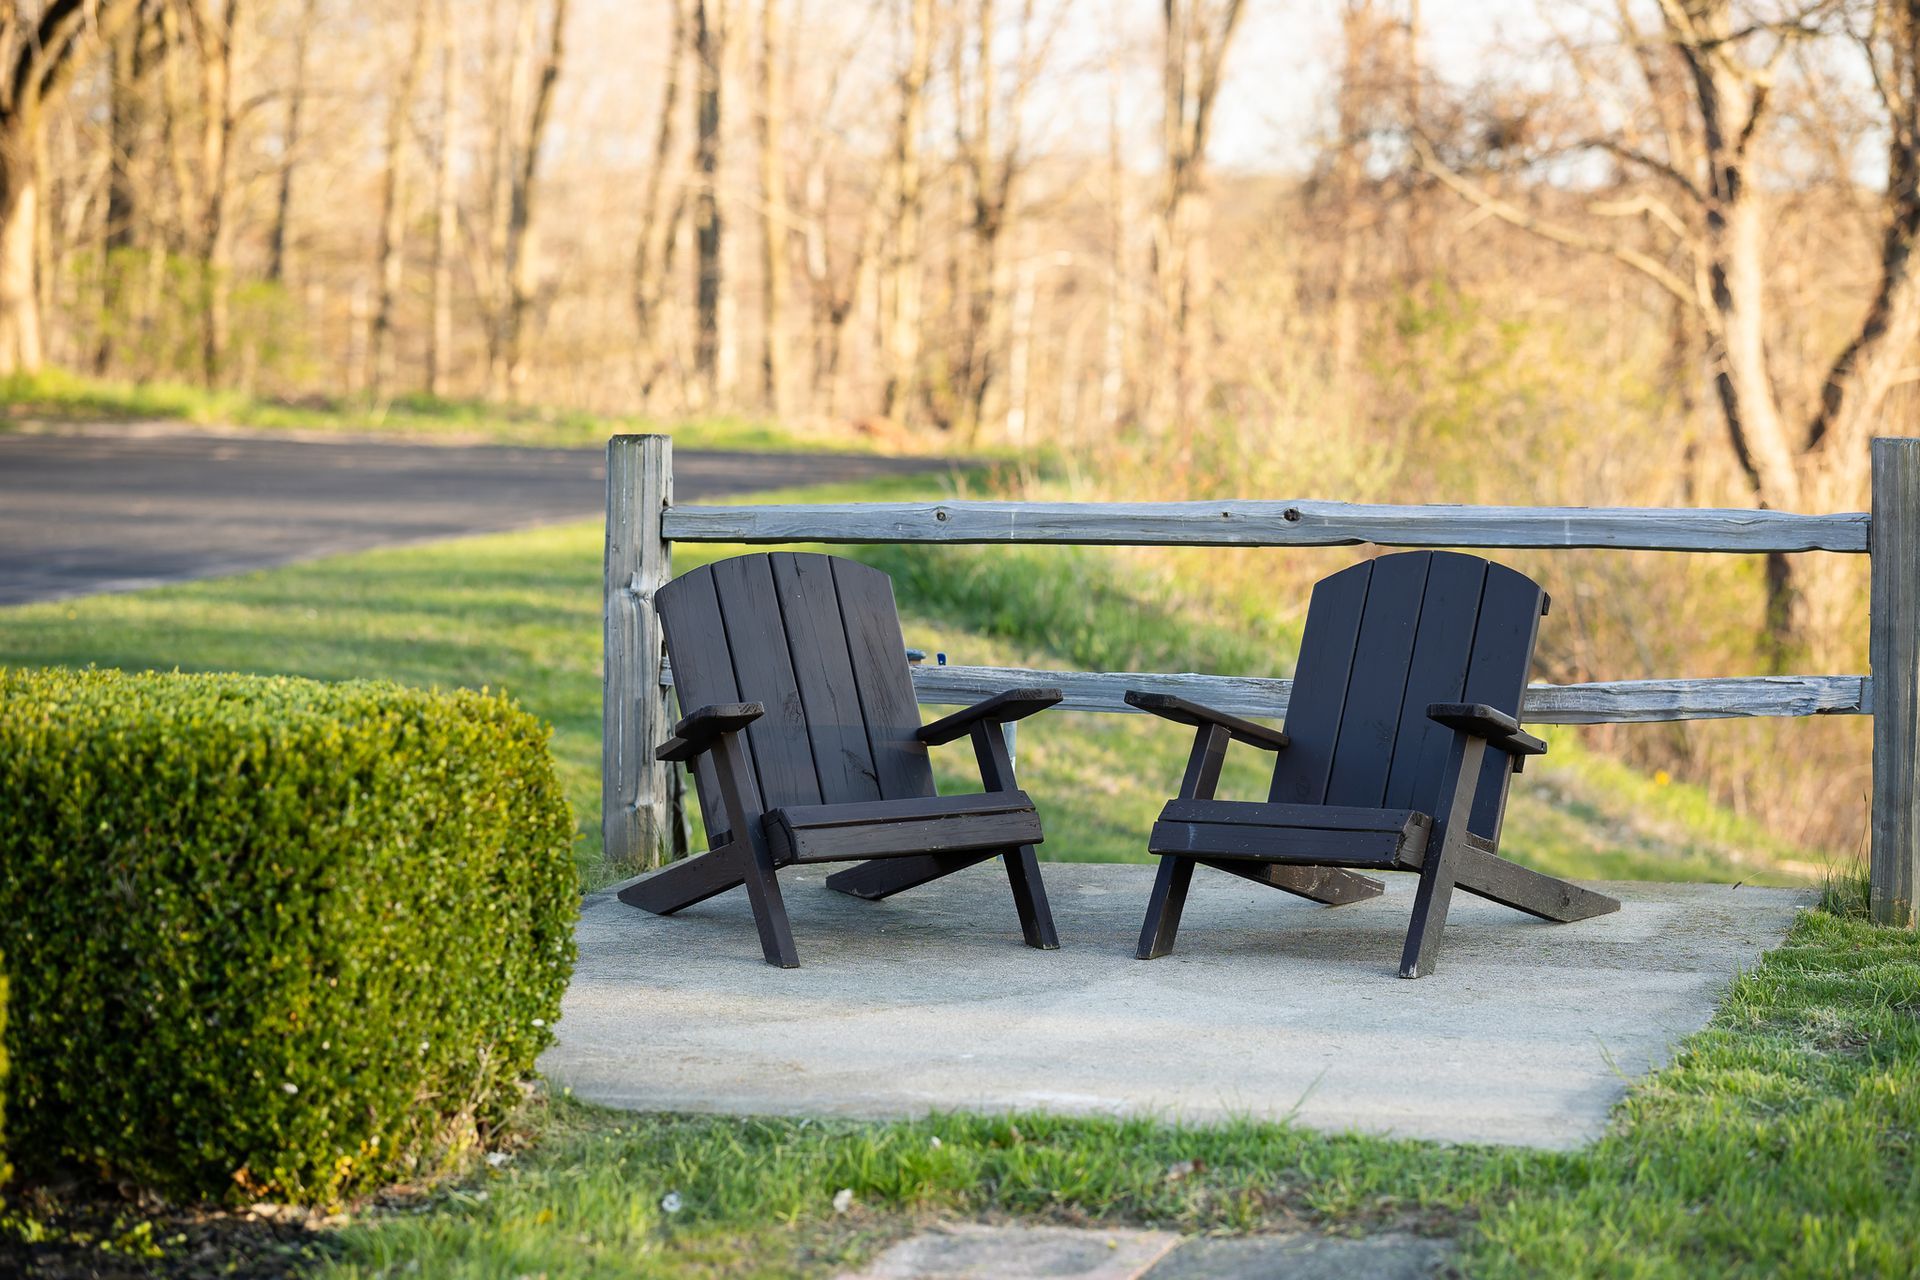 Two black adirondack chairs are sitting on a concrete patio next to a wooden fence.